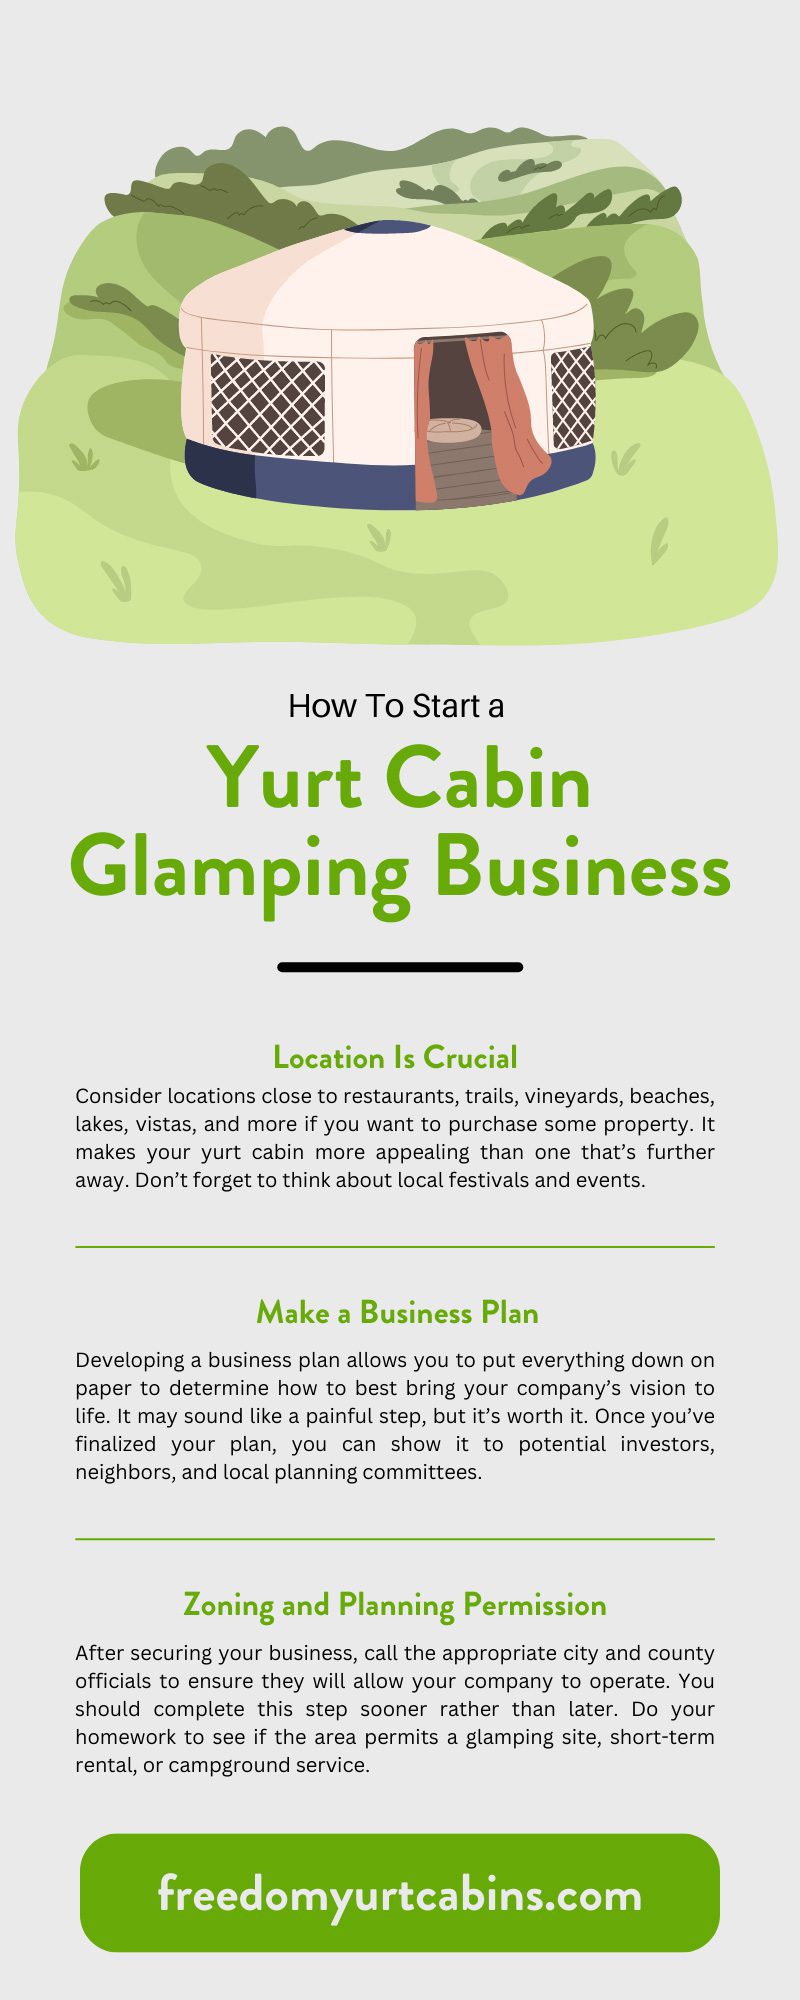 How To Start a Yurt Cabin Glamping Business
